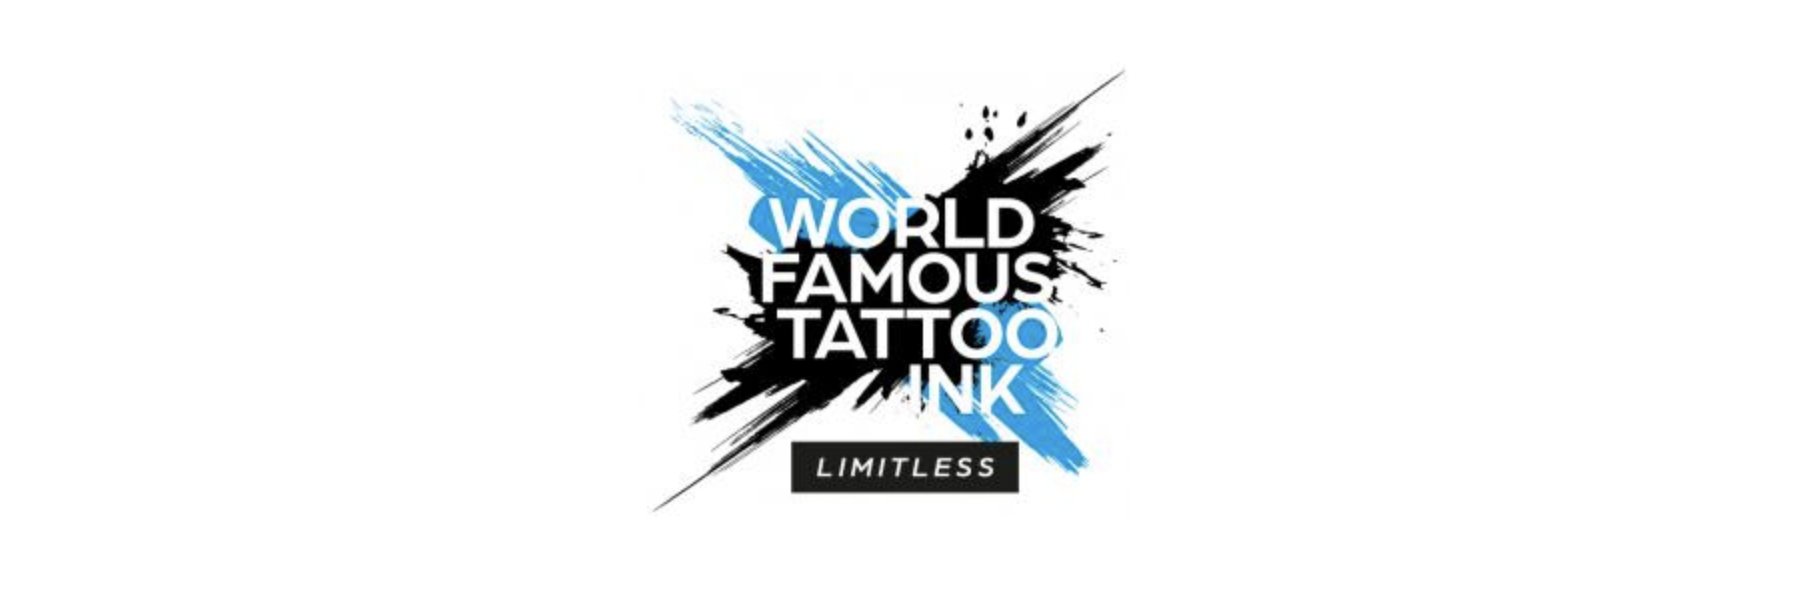 World Famous Limitless  Tattoo Ink  Obsidian Black Outlining 1607 